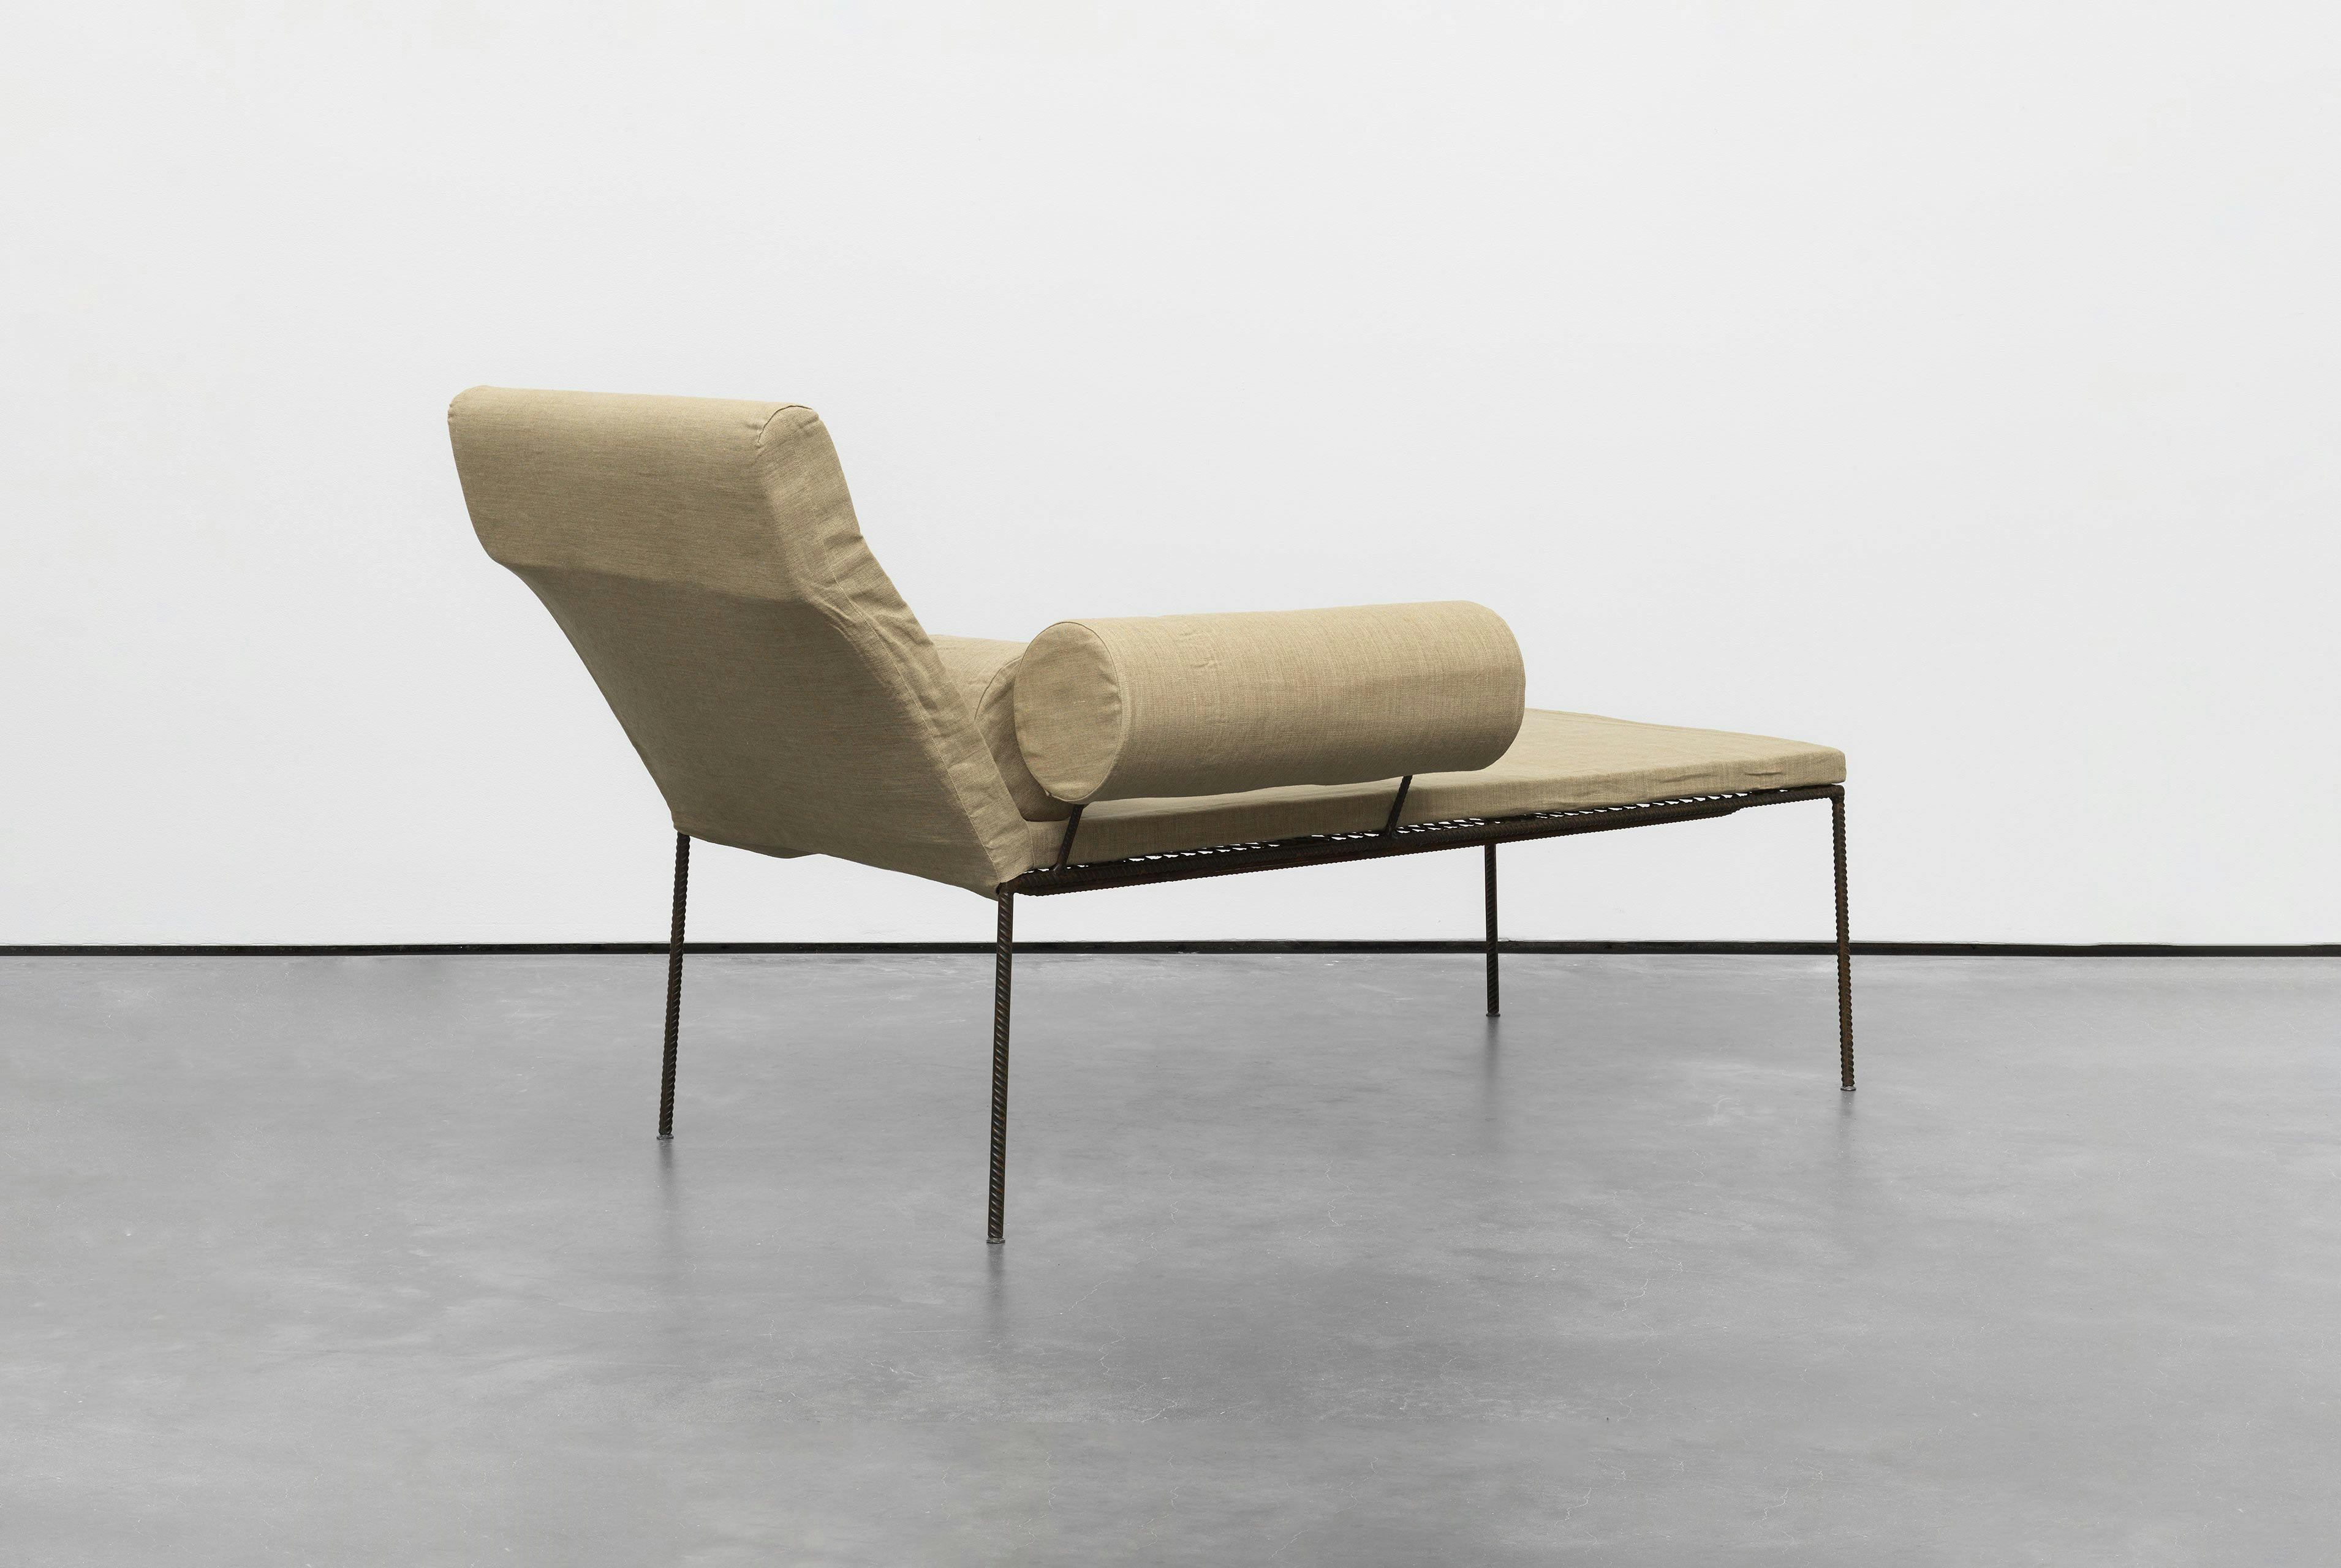 A furniture work by Franz West, titled Chaiselognue (Chaise Longue), dated 1992/2015.